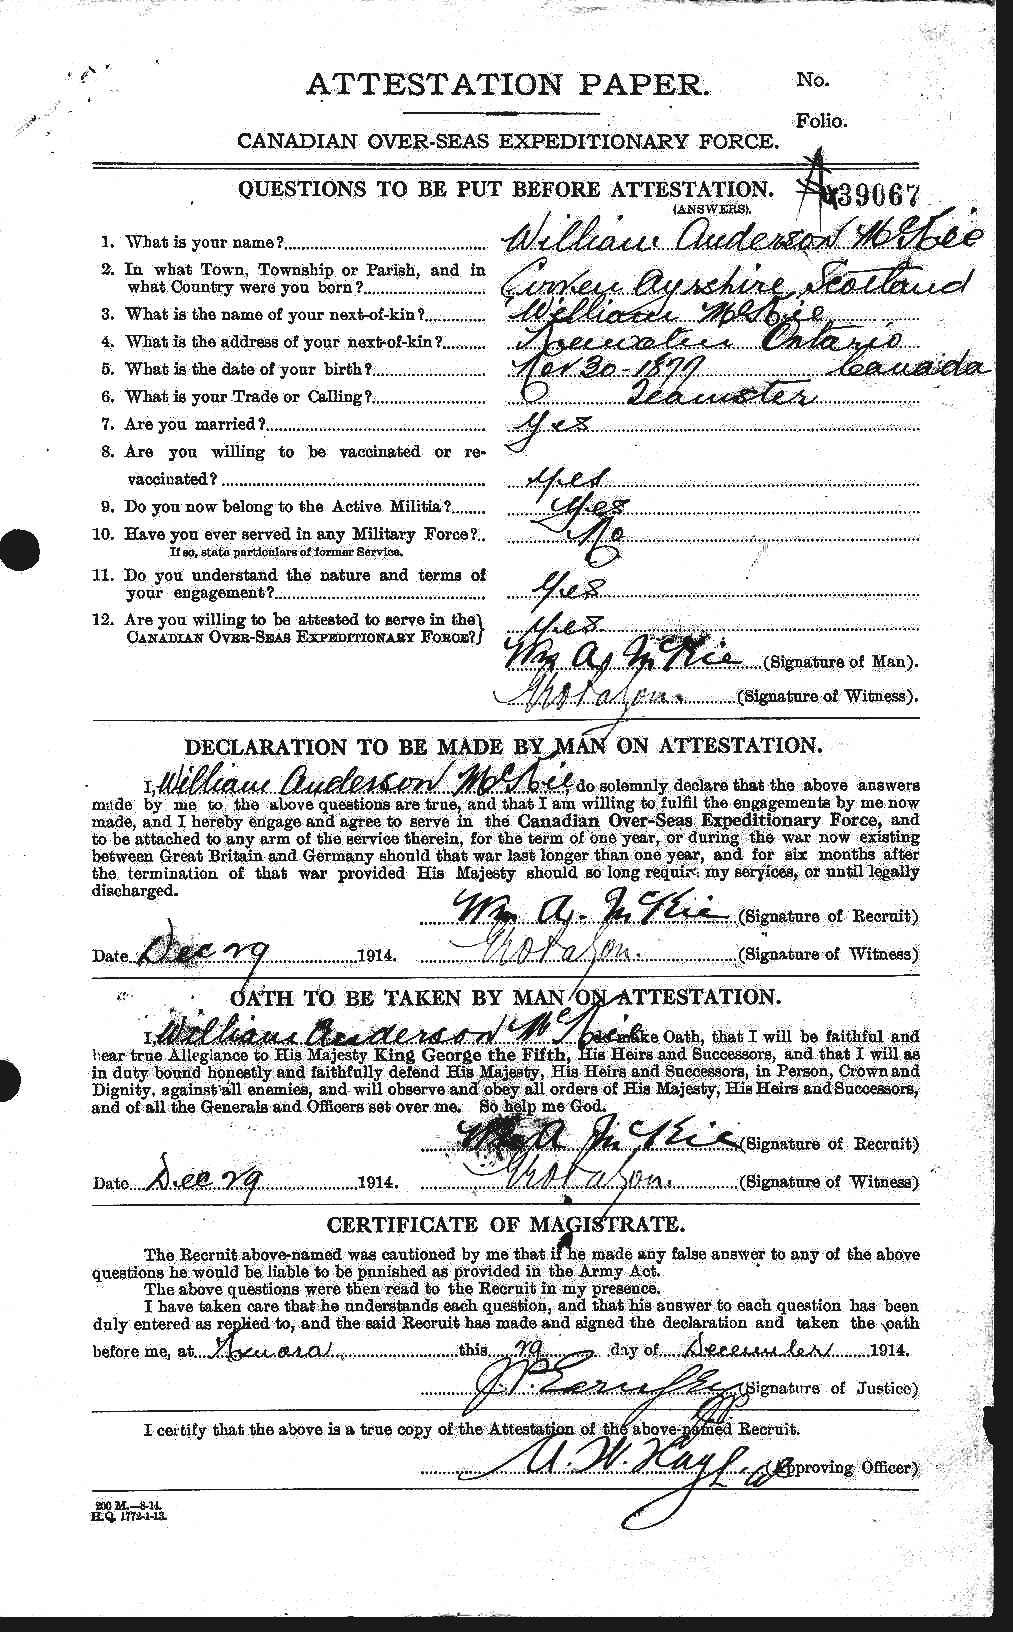 Personnel Records of the First World War - CEF 533766a